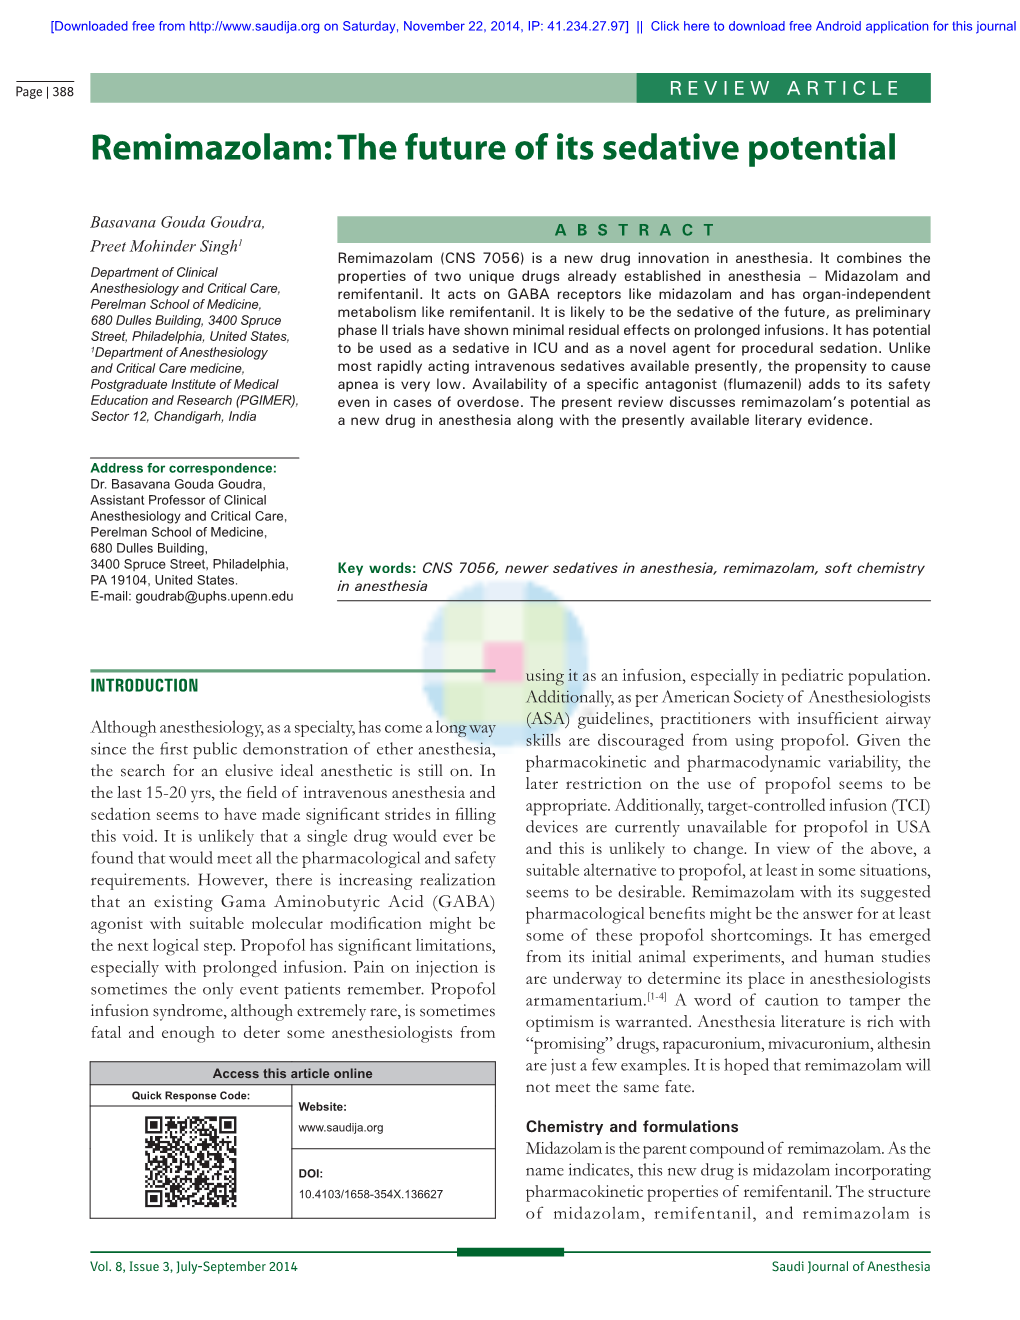 Remimazolam: the Future of Its Sedative Potential